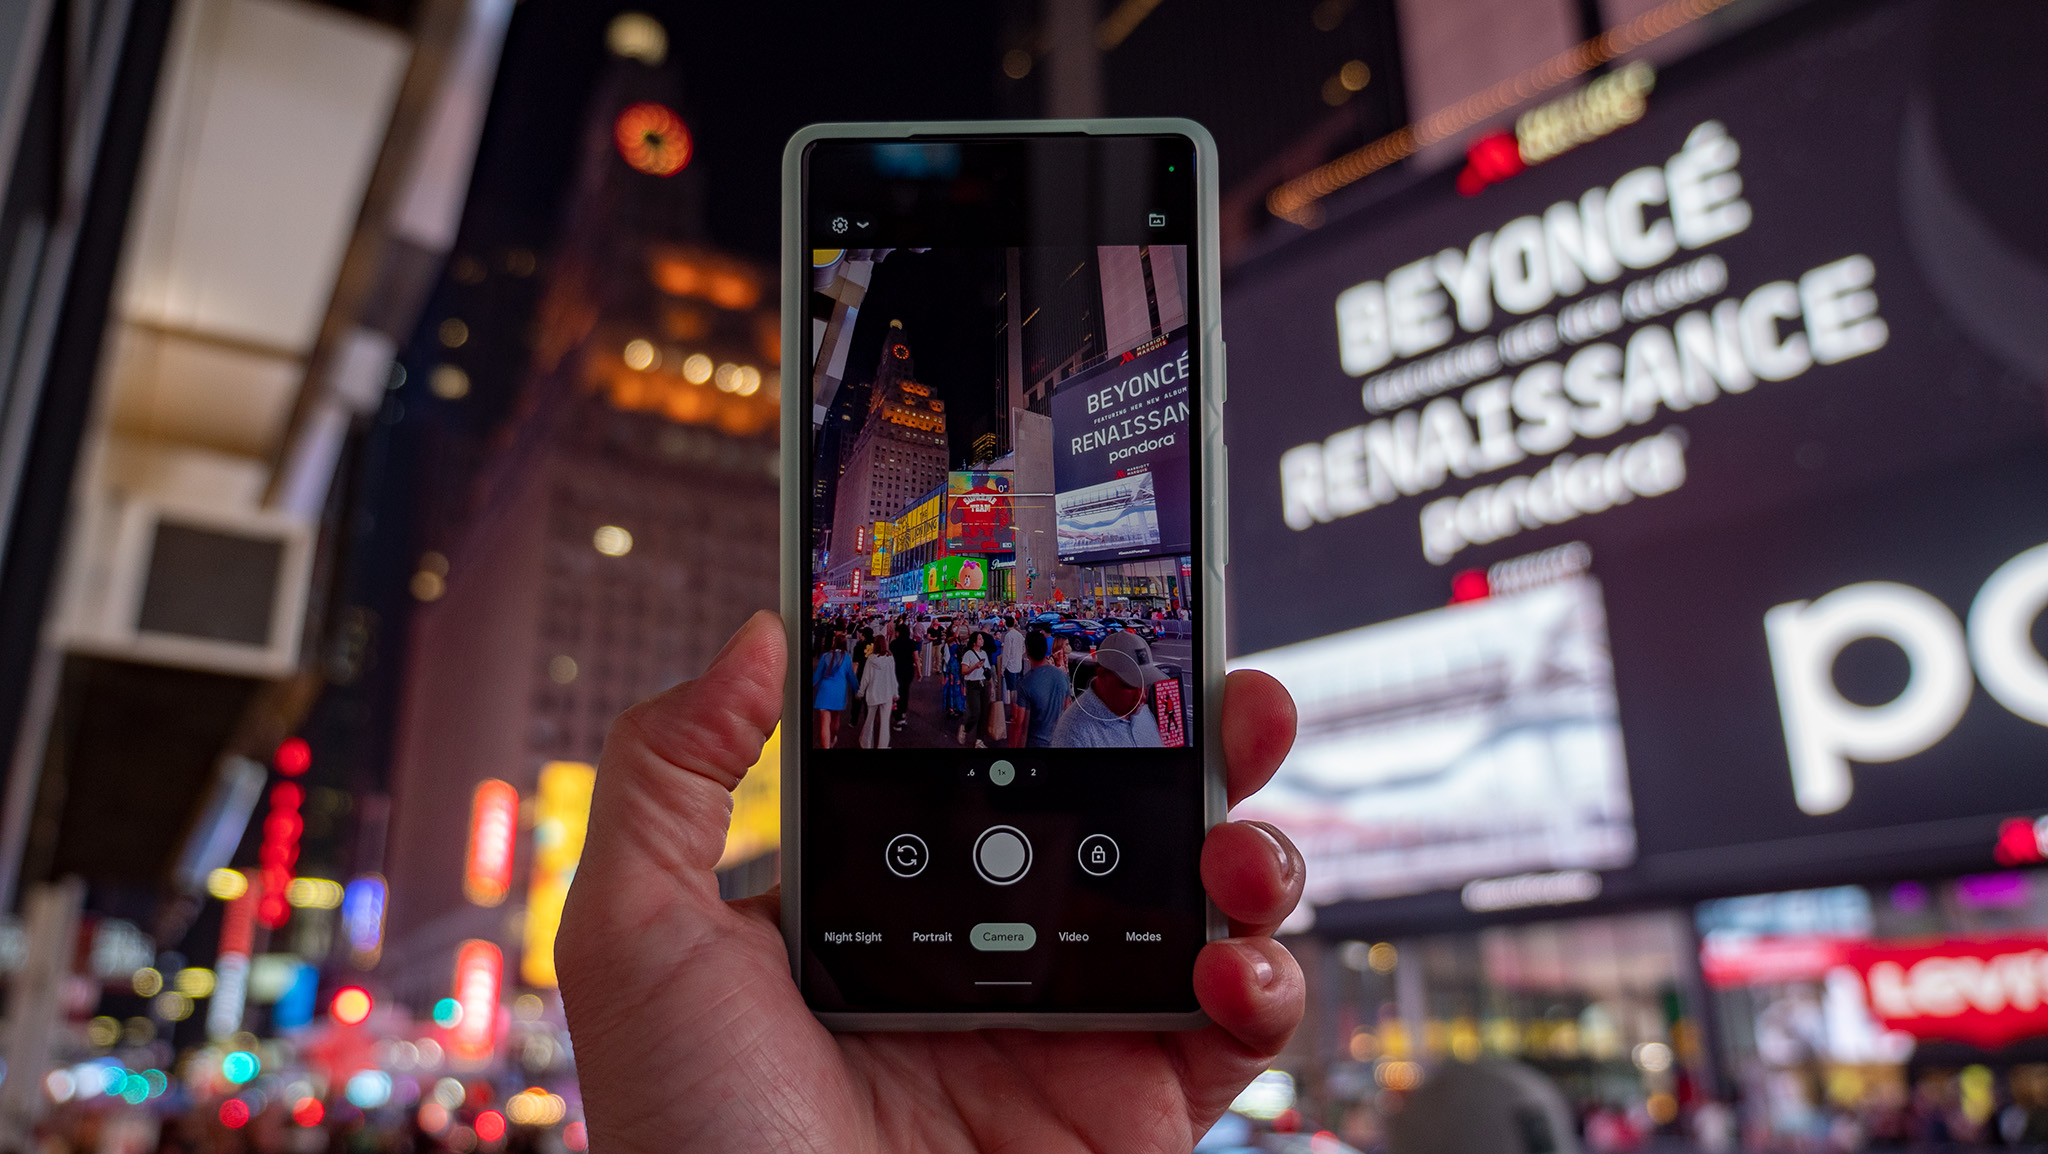 Google Pixel 6a camera viewfinder at night in Times Square